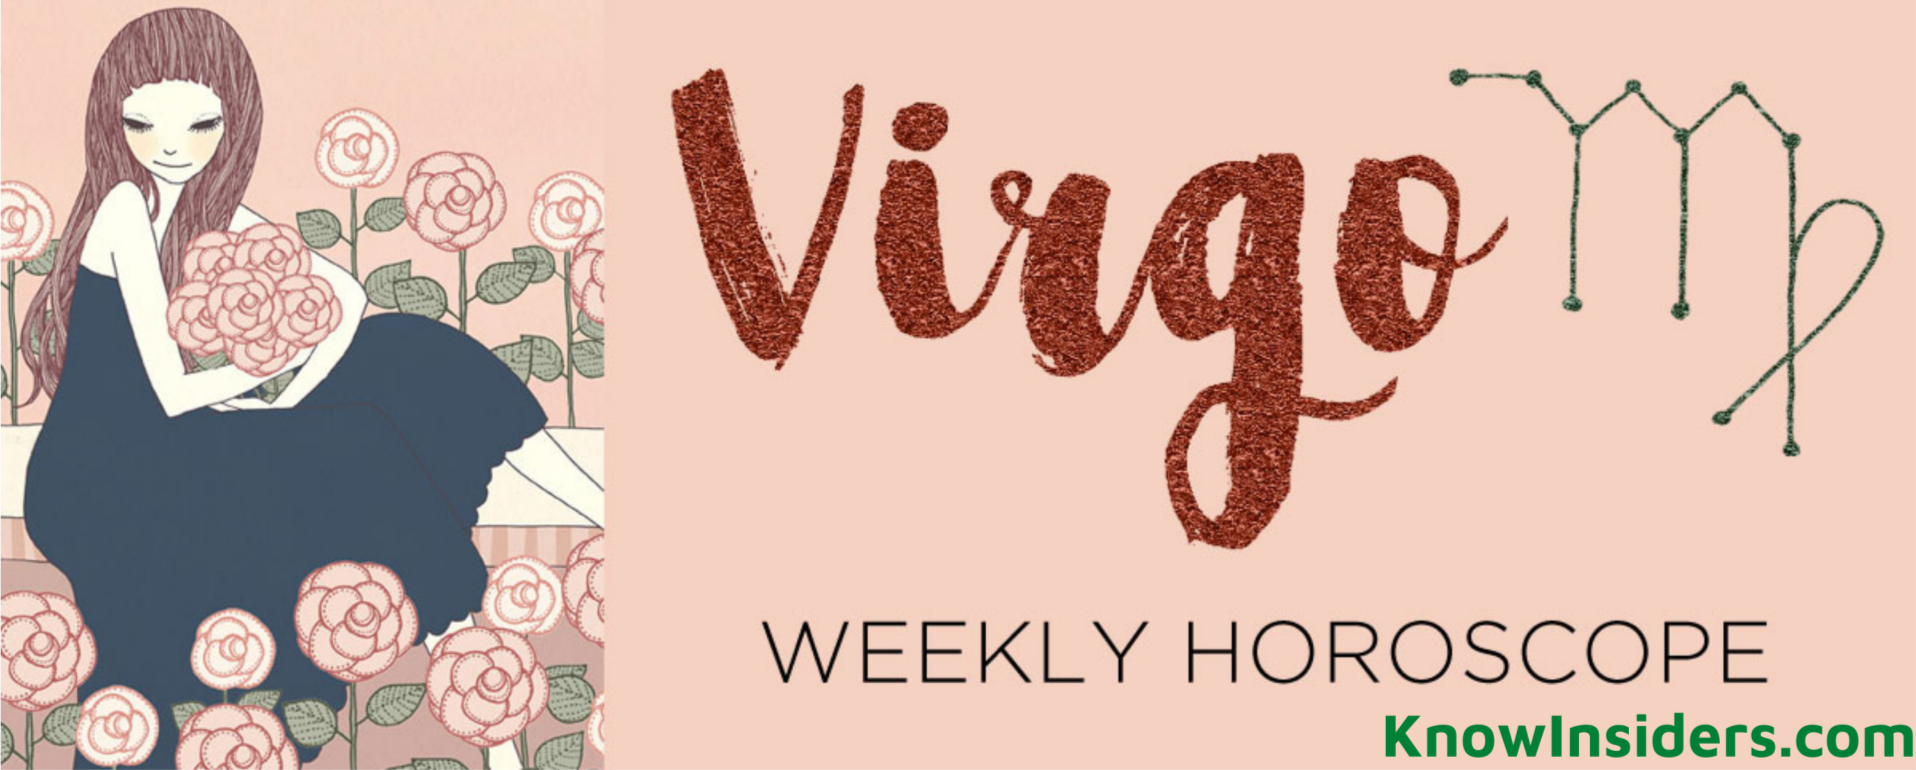 VIRGO Weekly Horoscope (April 26 - May 2): Astrological Predictions for Love, Money, Career and Health